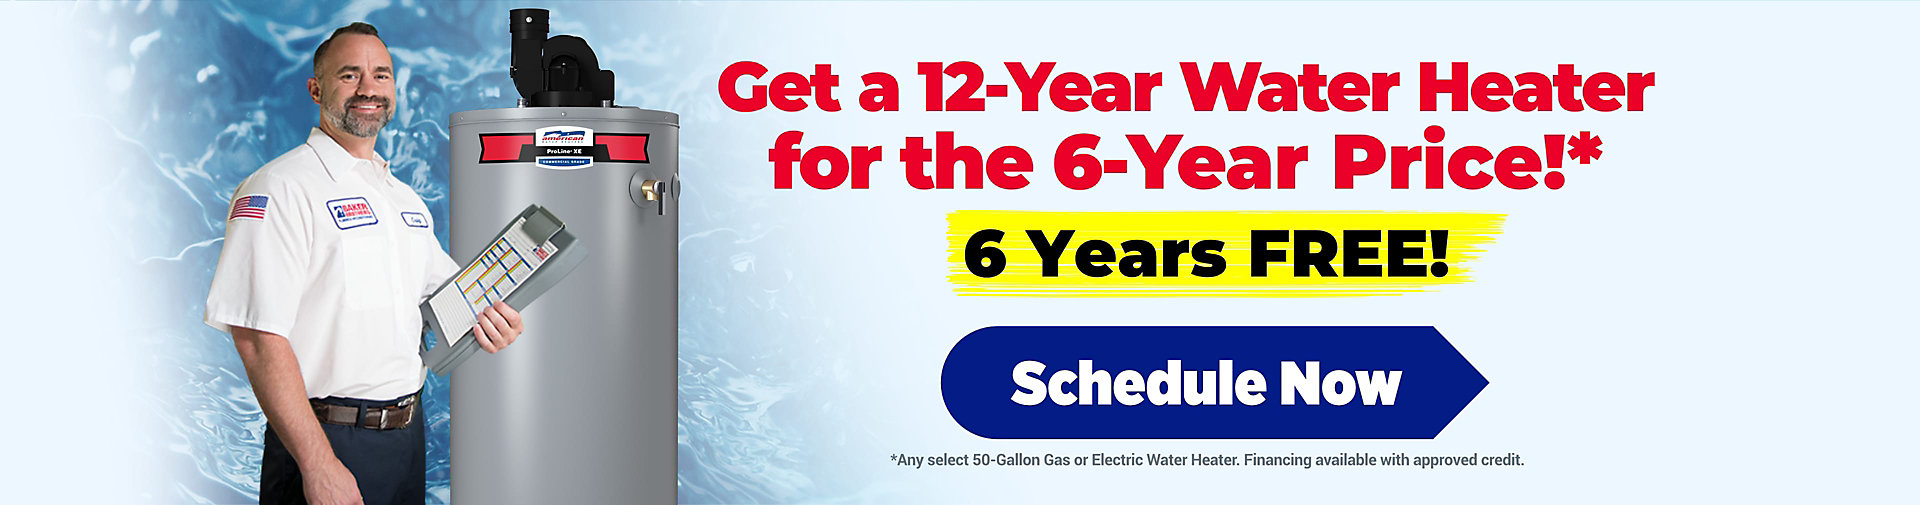 Get a 12 Year Water Heater for the 6 Year Price